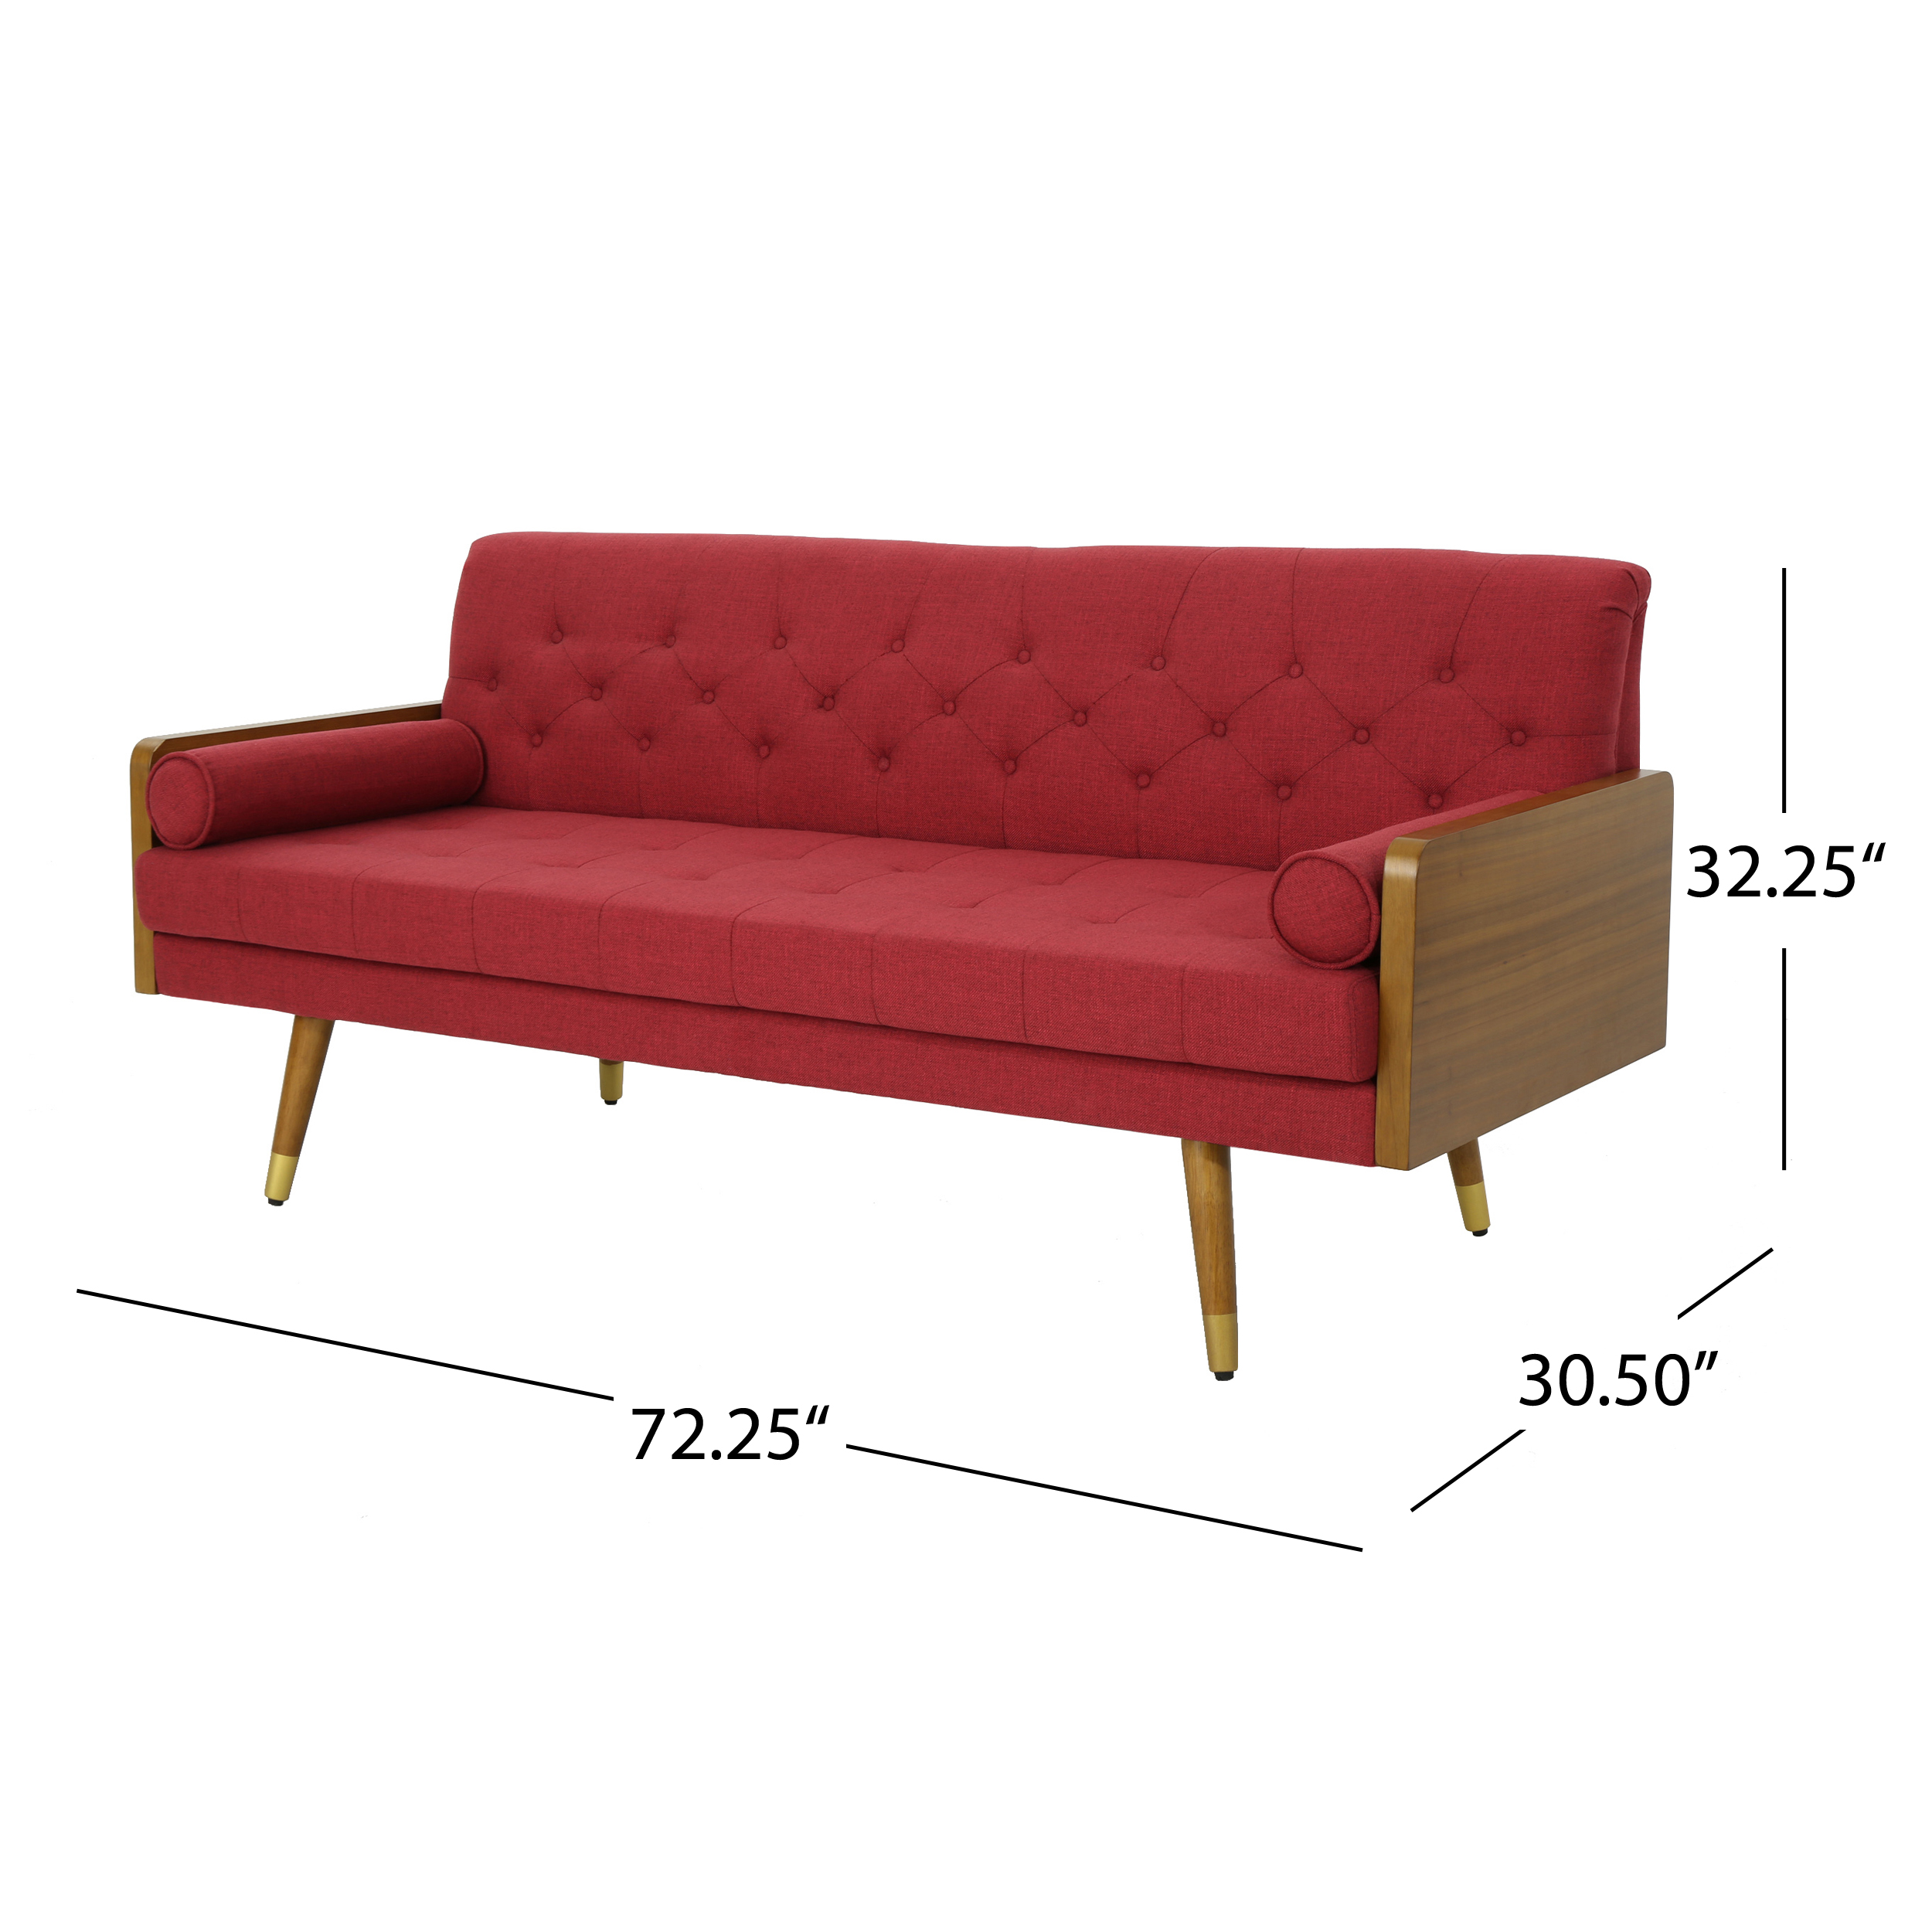 Noble House Nathanial Tufted Fabric Sofa, Red, Dark Walnut - image 3 of 7